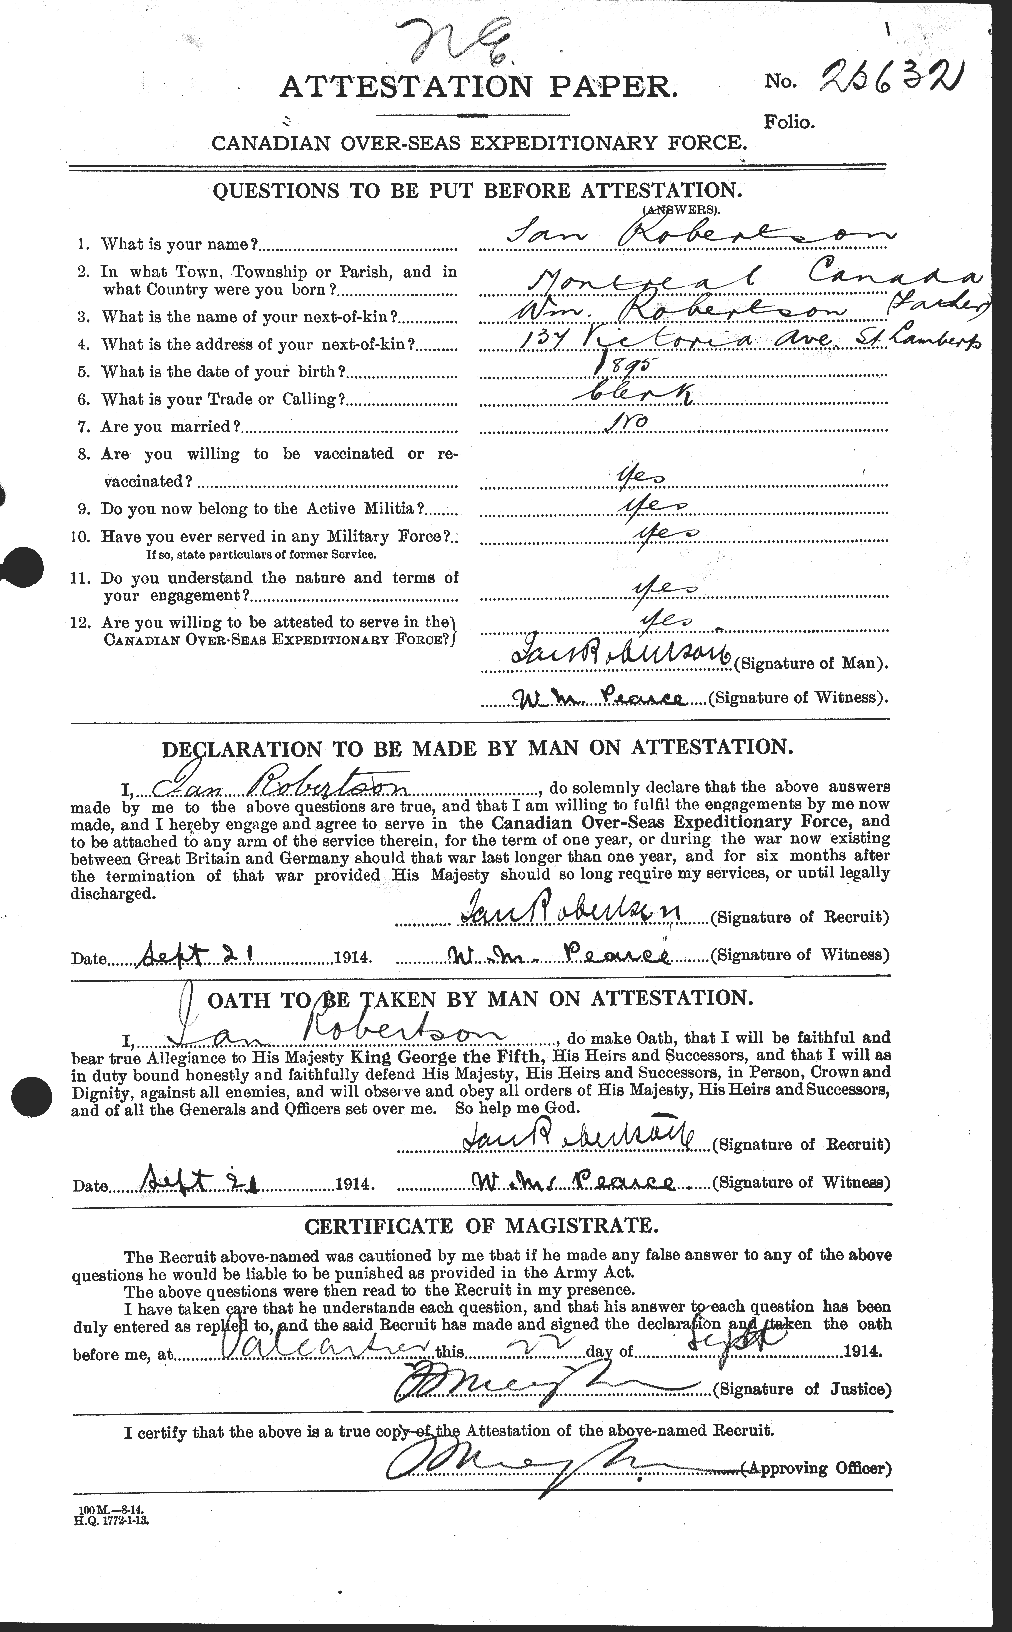 Personnel Records of the First World War - CEF 609896a